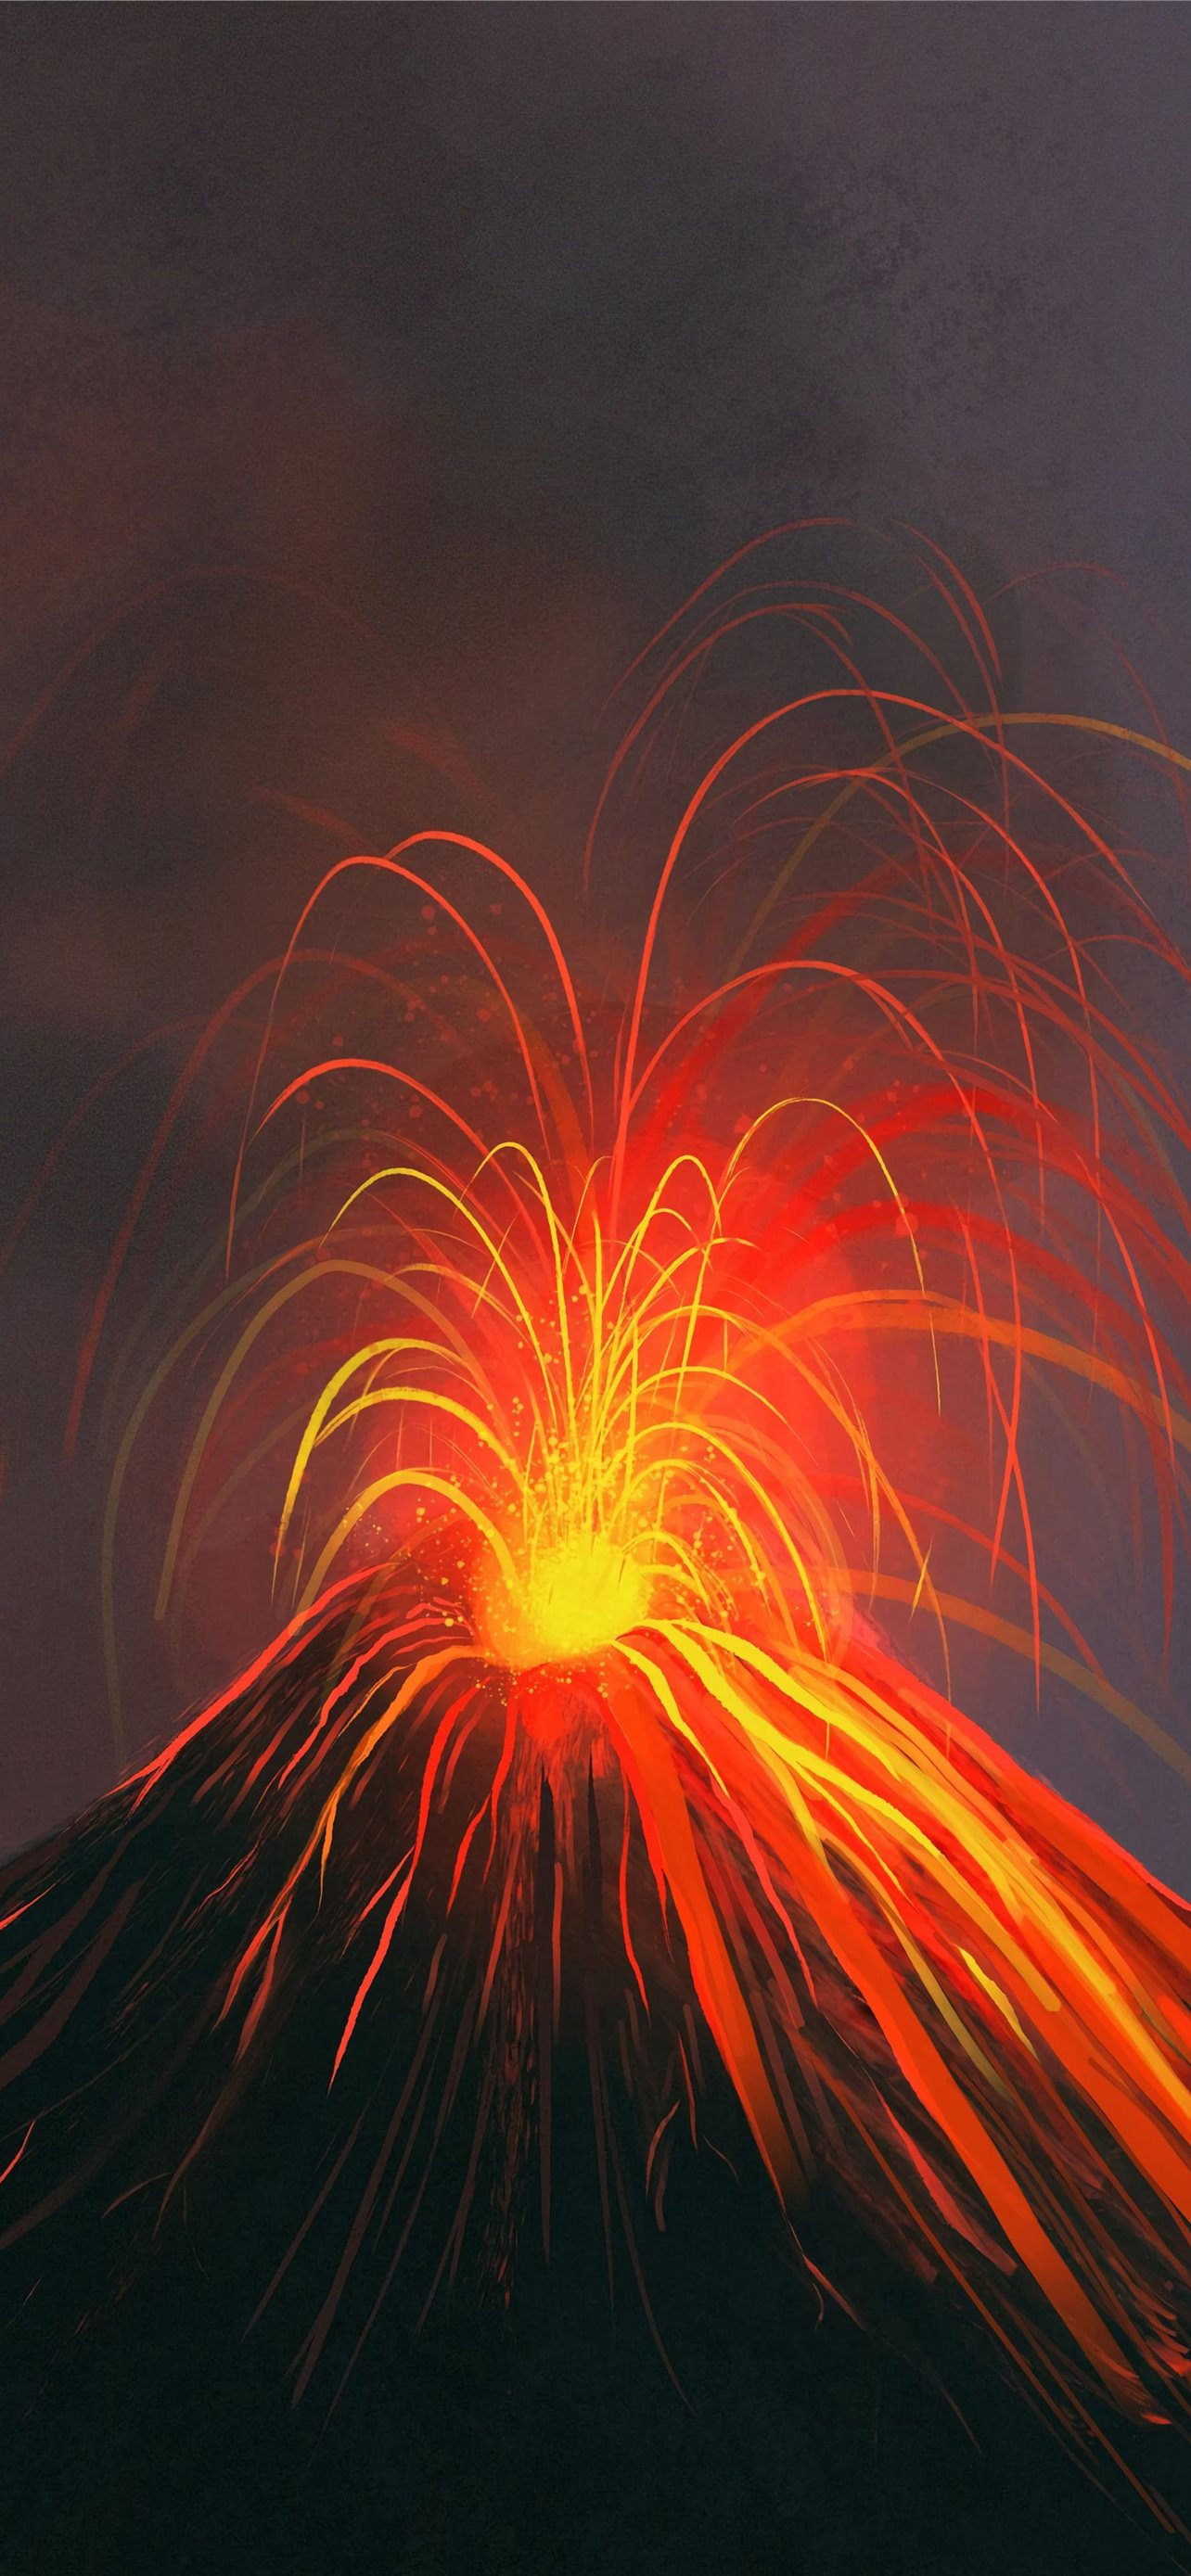 1284x2778 volcano eruption art samsung galaxy s4 s5 note iPhone Wallpapers Free Download